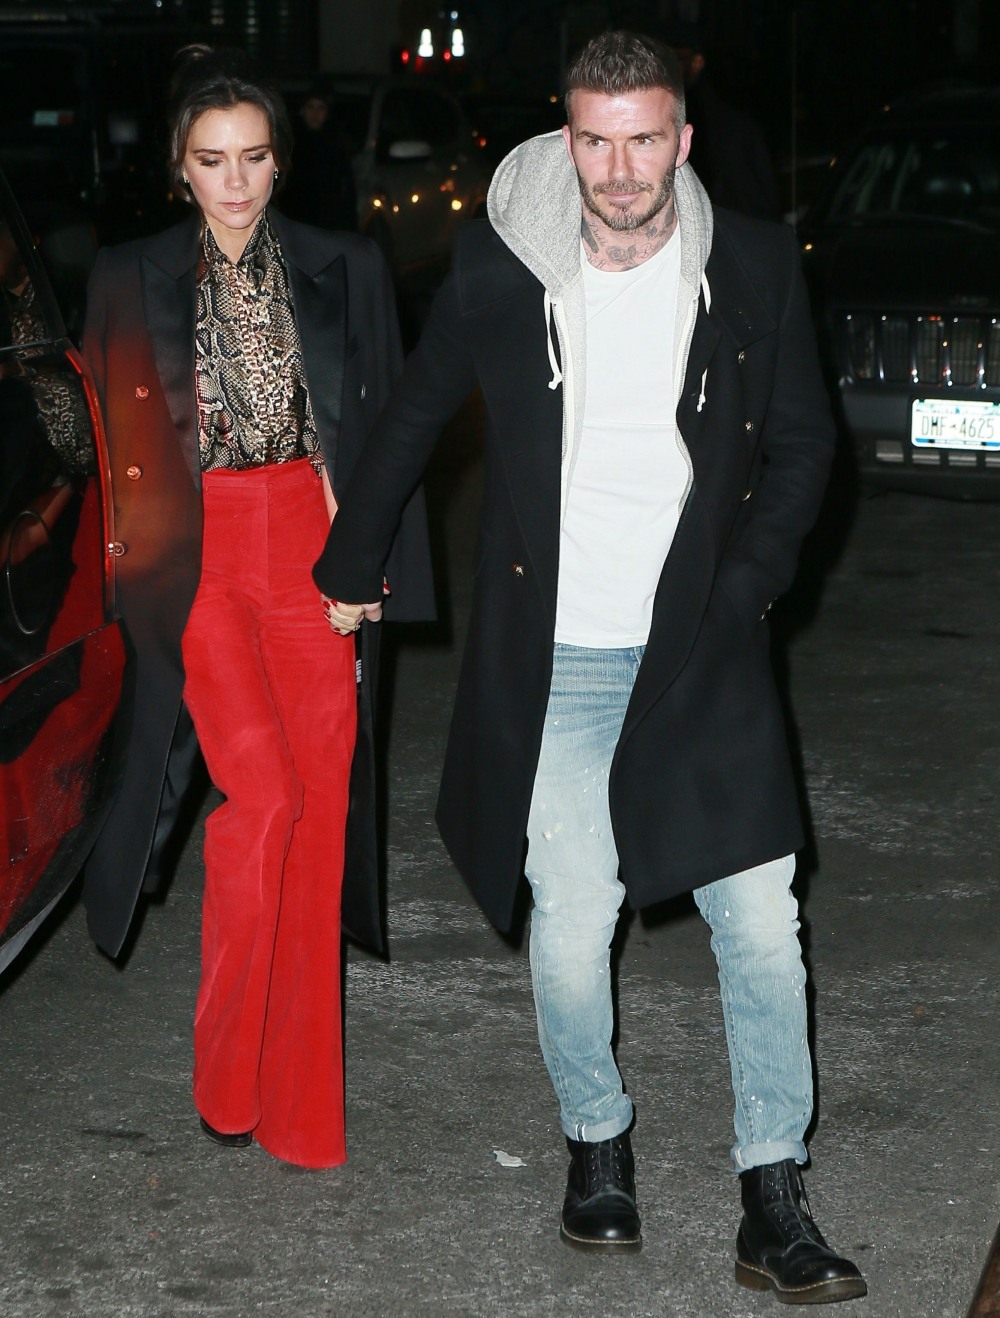 David and Victoria Beckham arrive at Victoria's Reebok party in New York